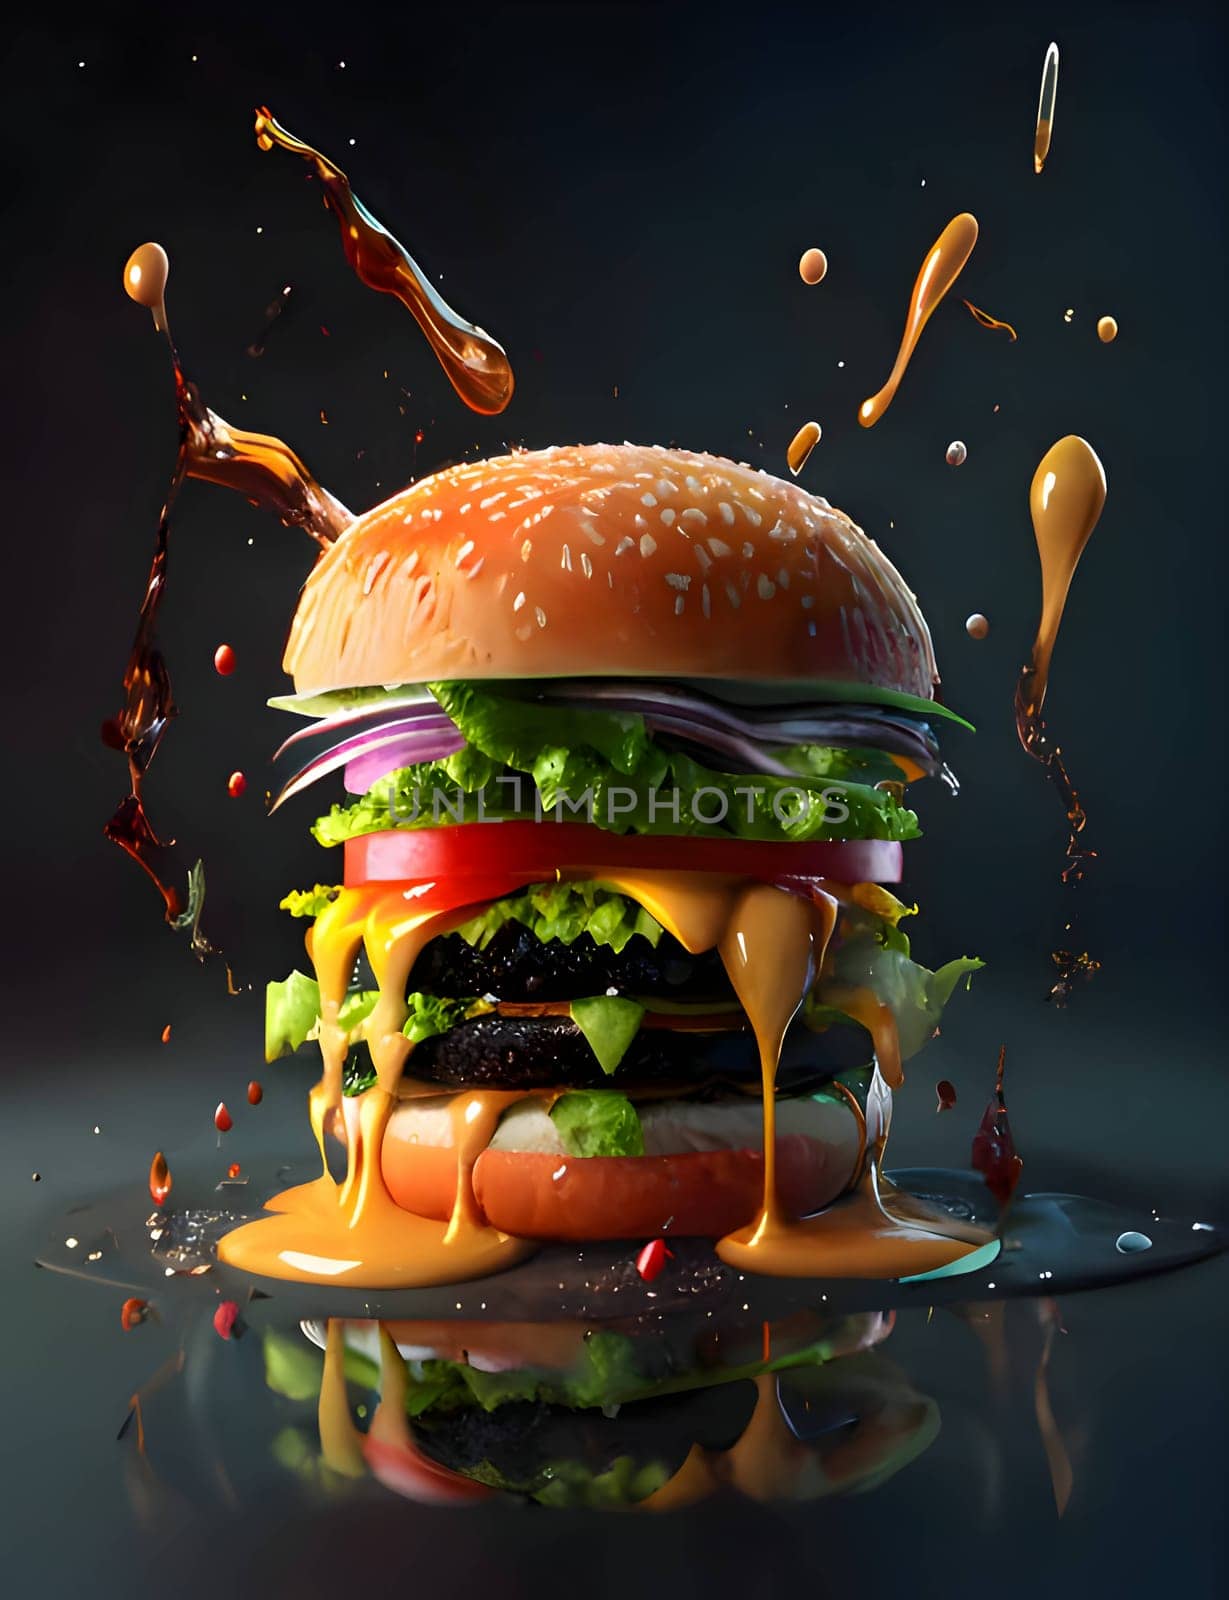 Tasty multi-layered burger with lettuce, cheese, tomato and onion on a dark background by ThemesS